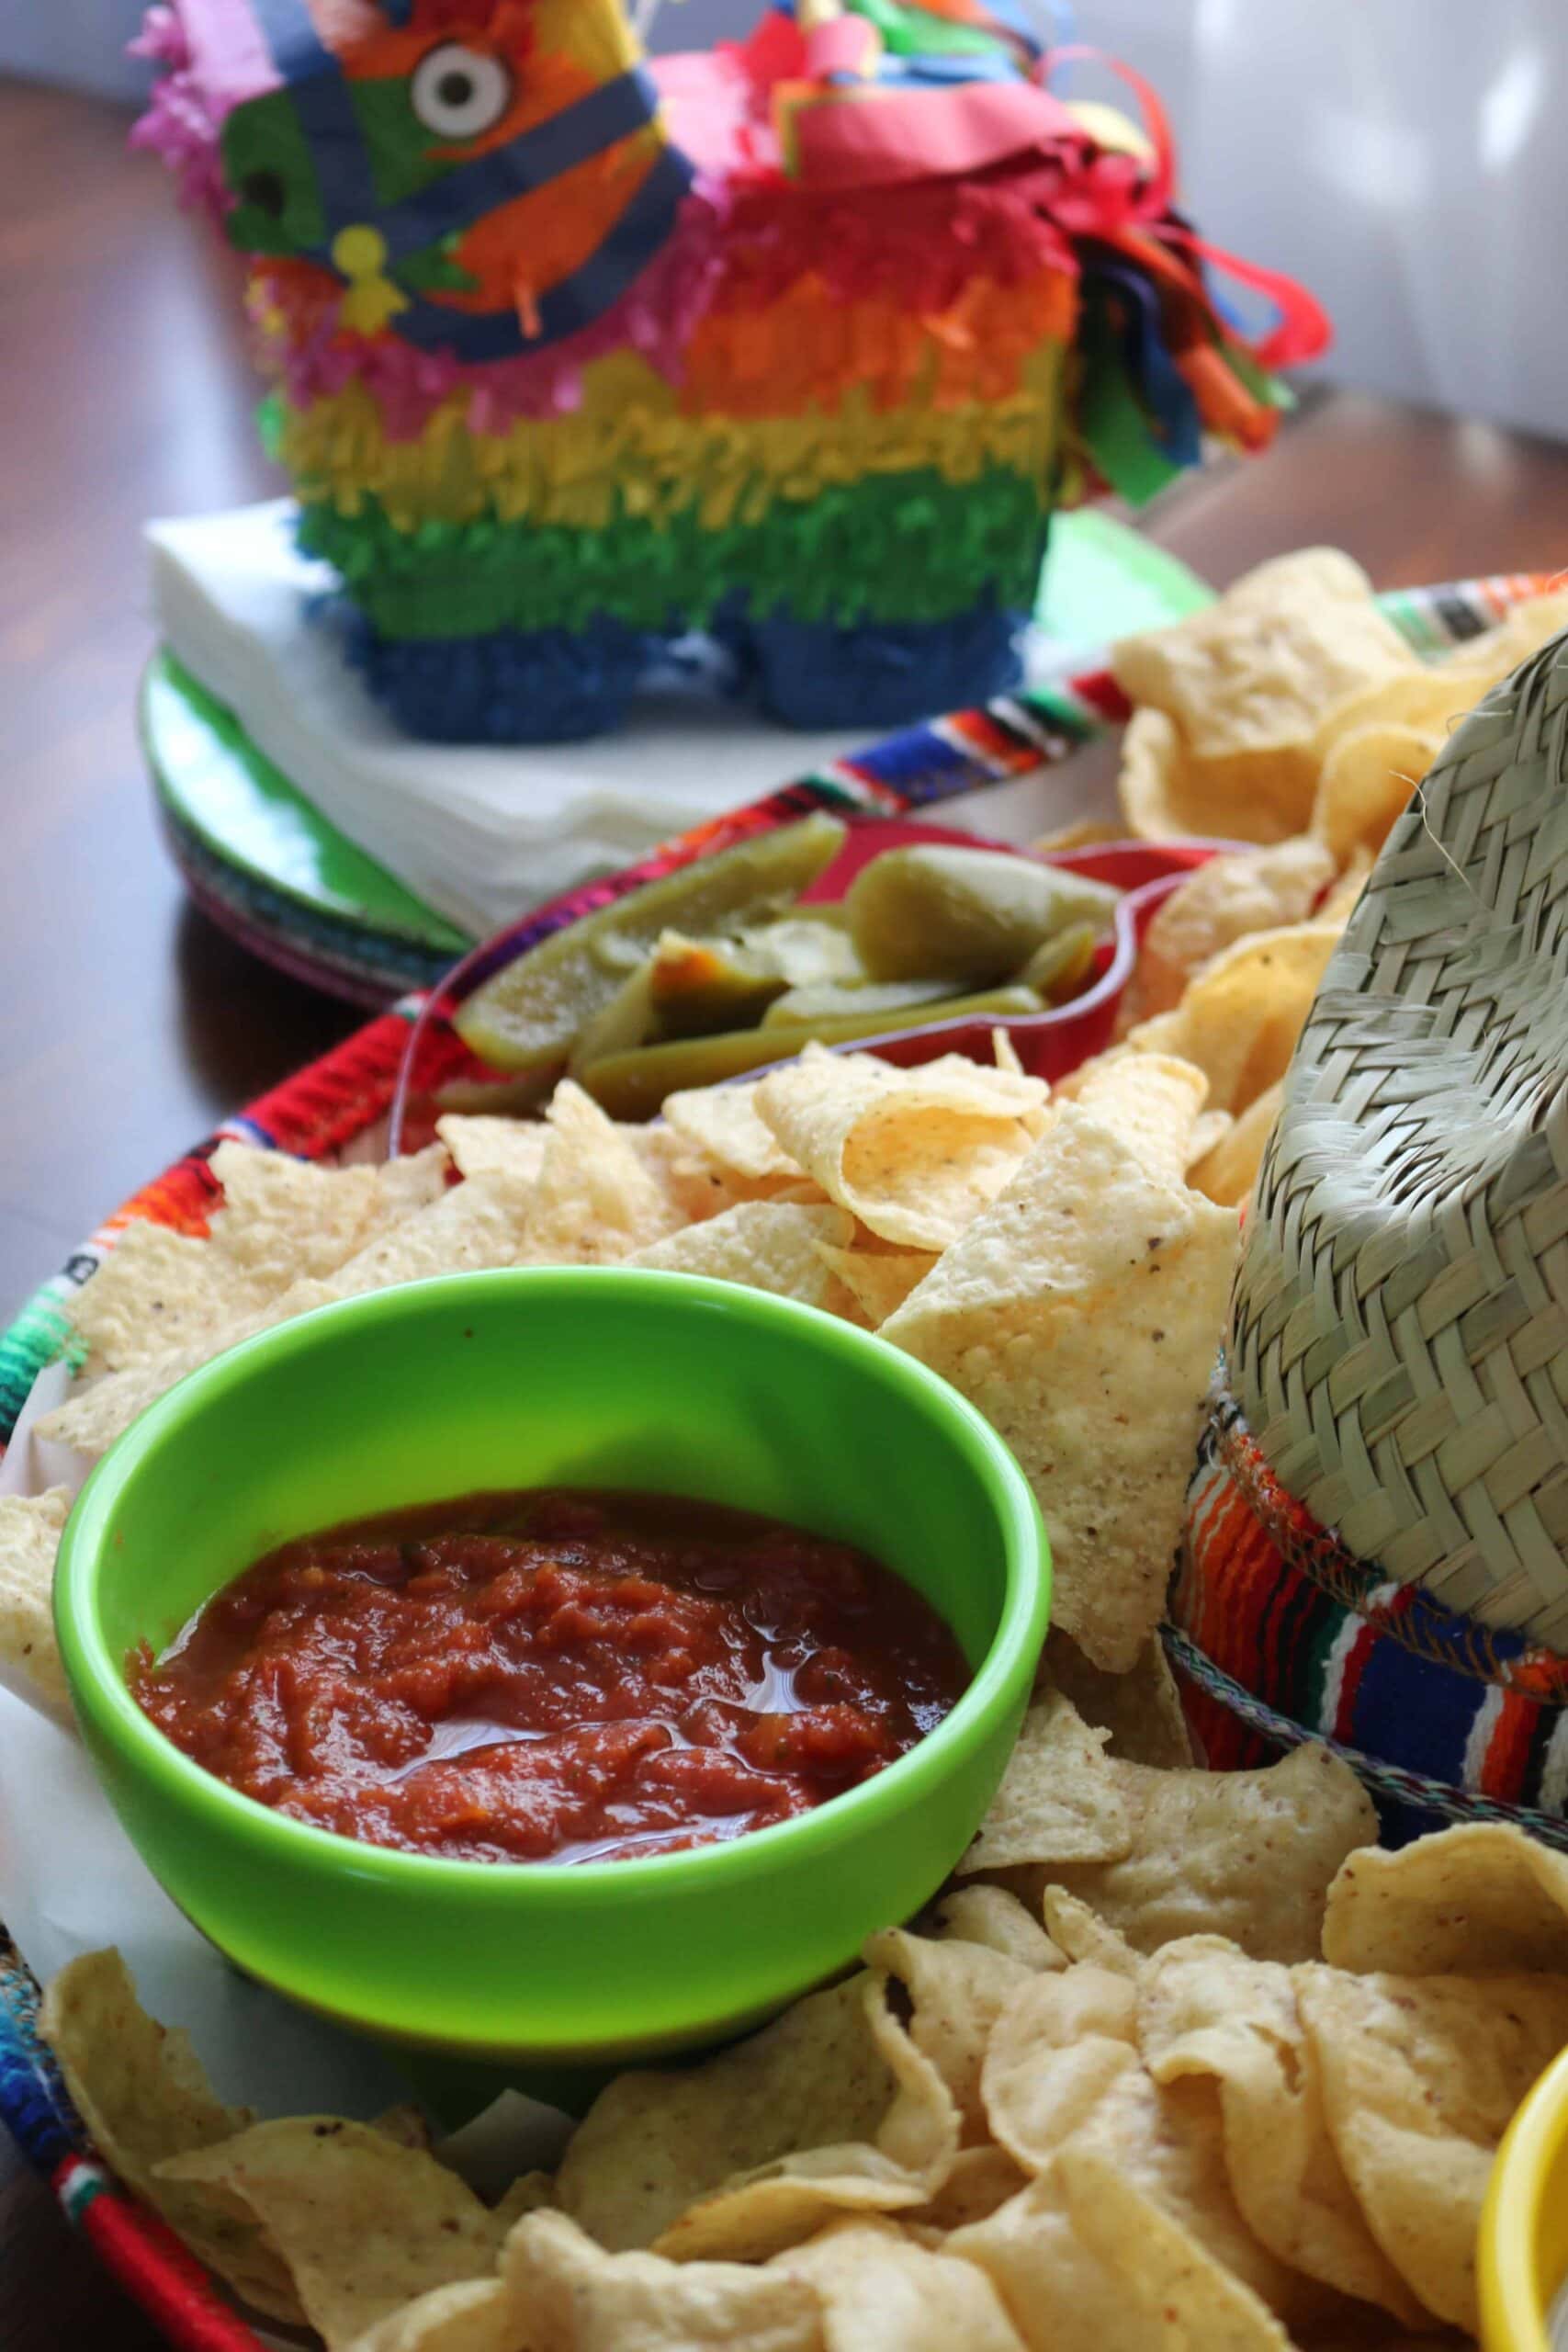 Chips and salsa 5 de Mayo party